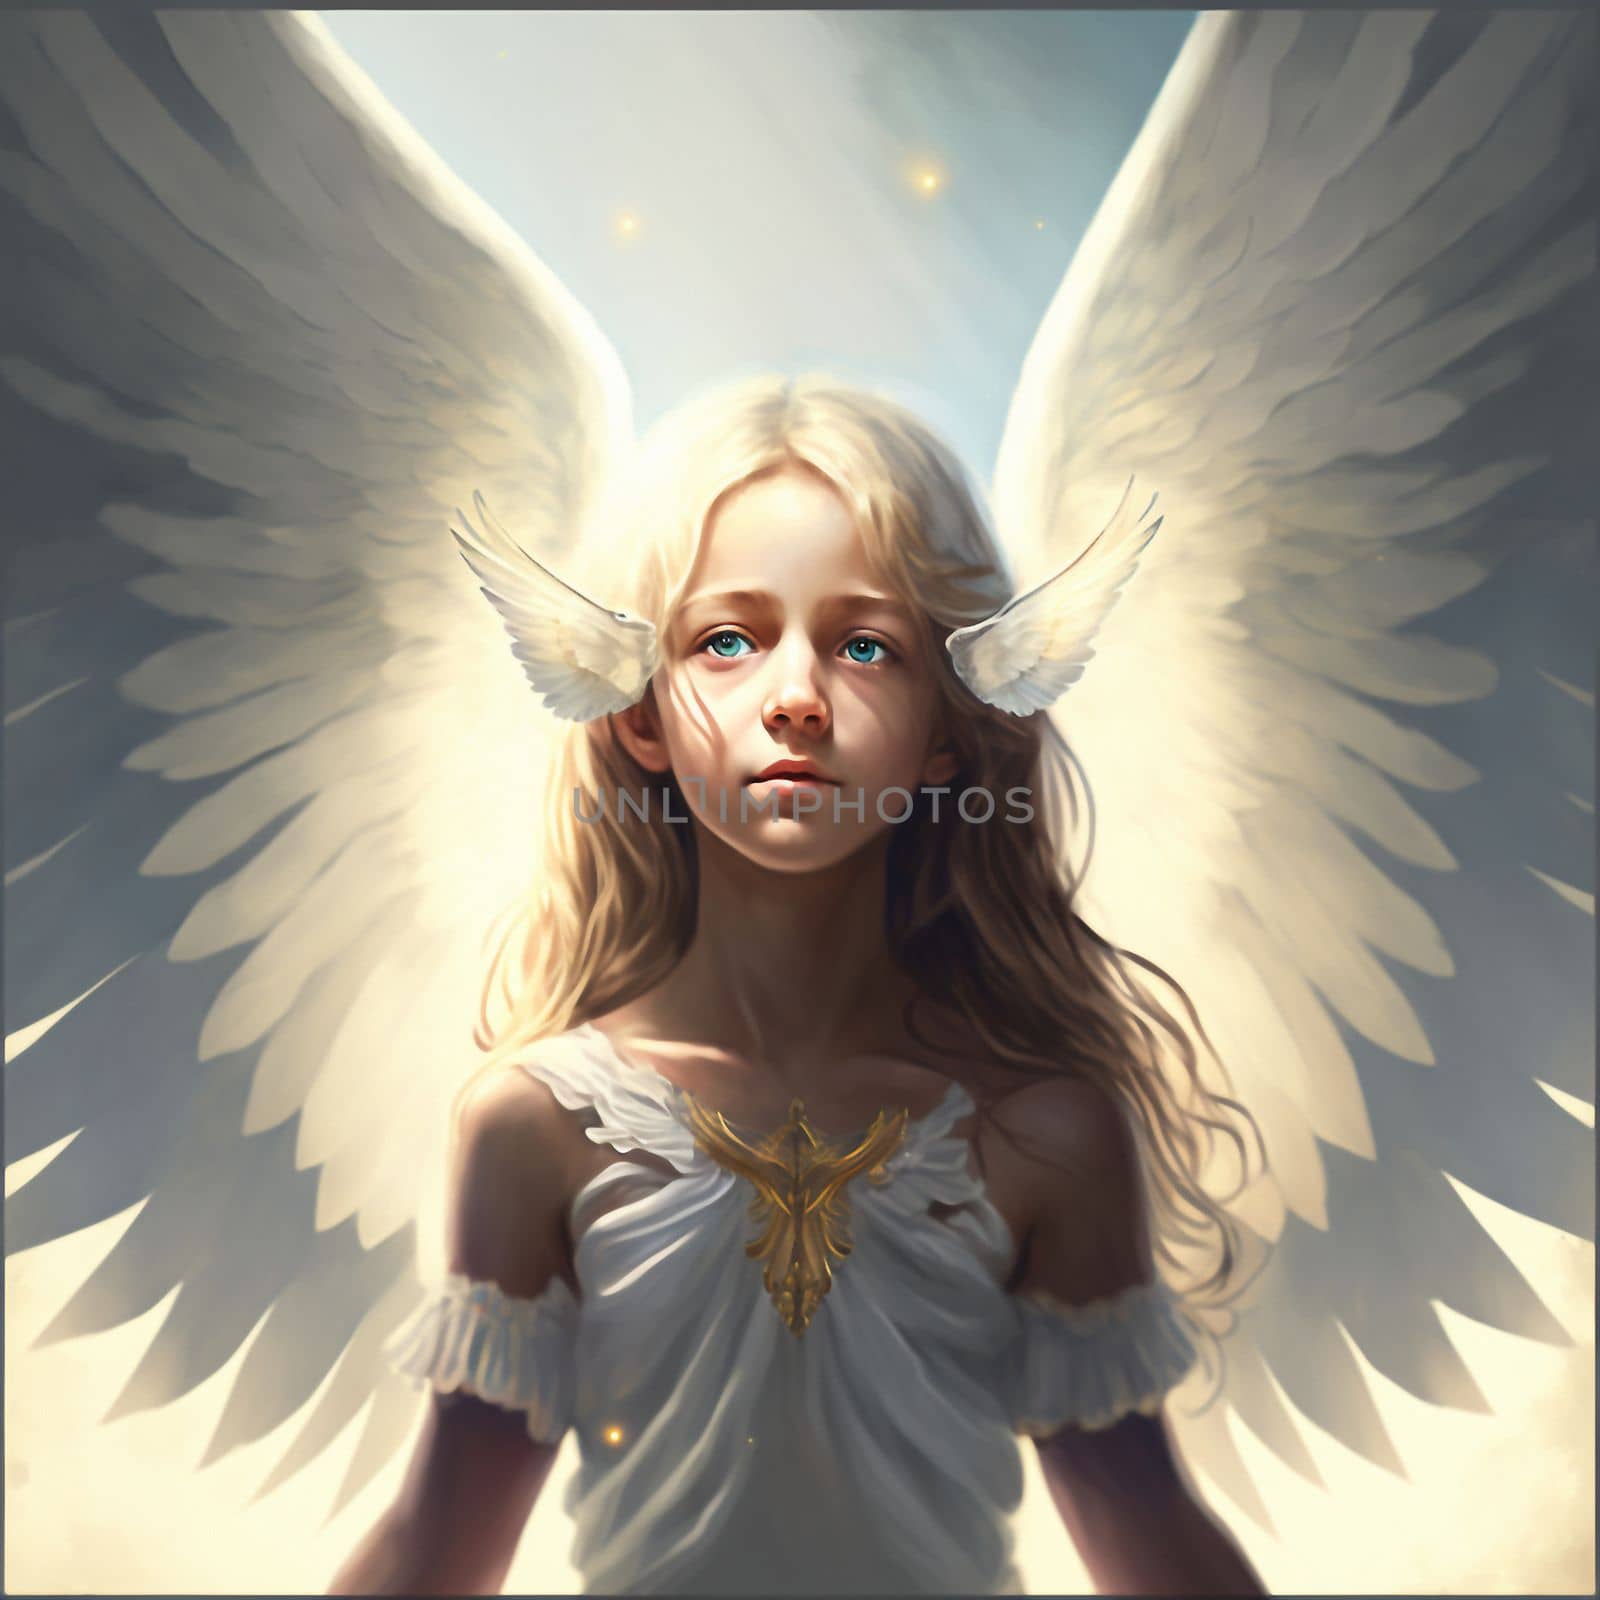 Angel girl descends from heaven. High quality illustration